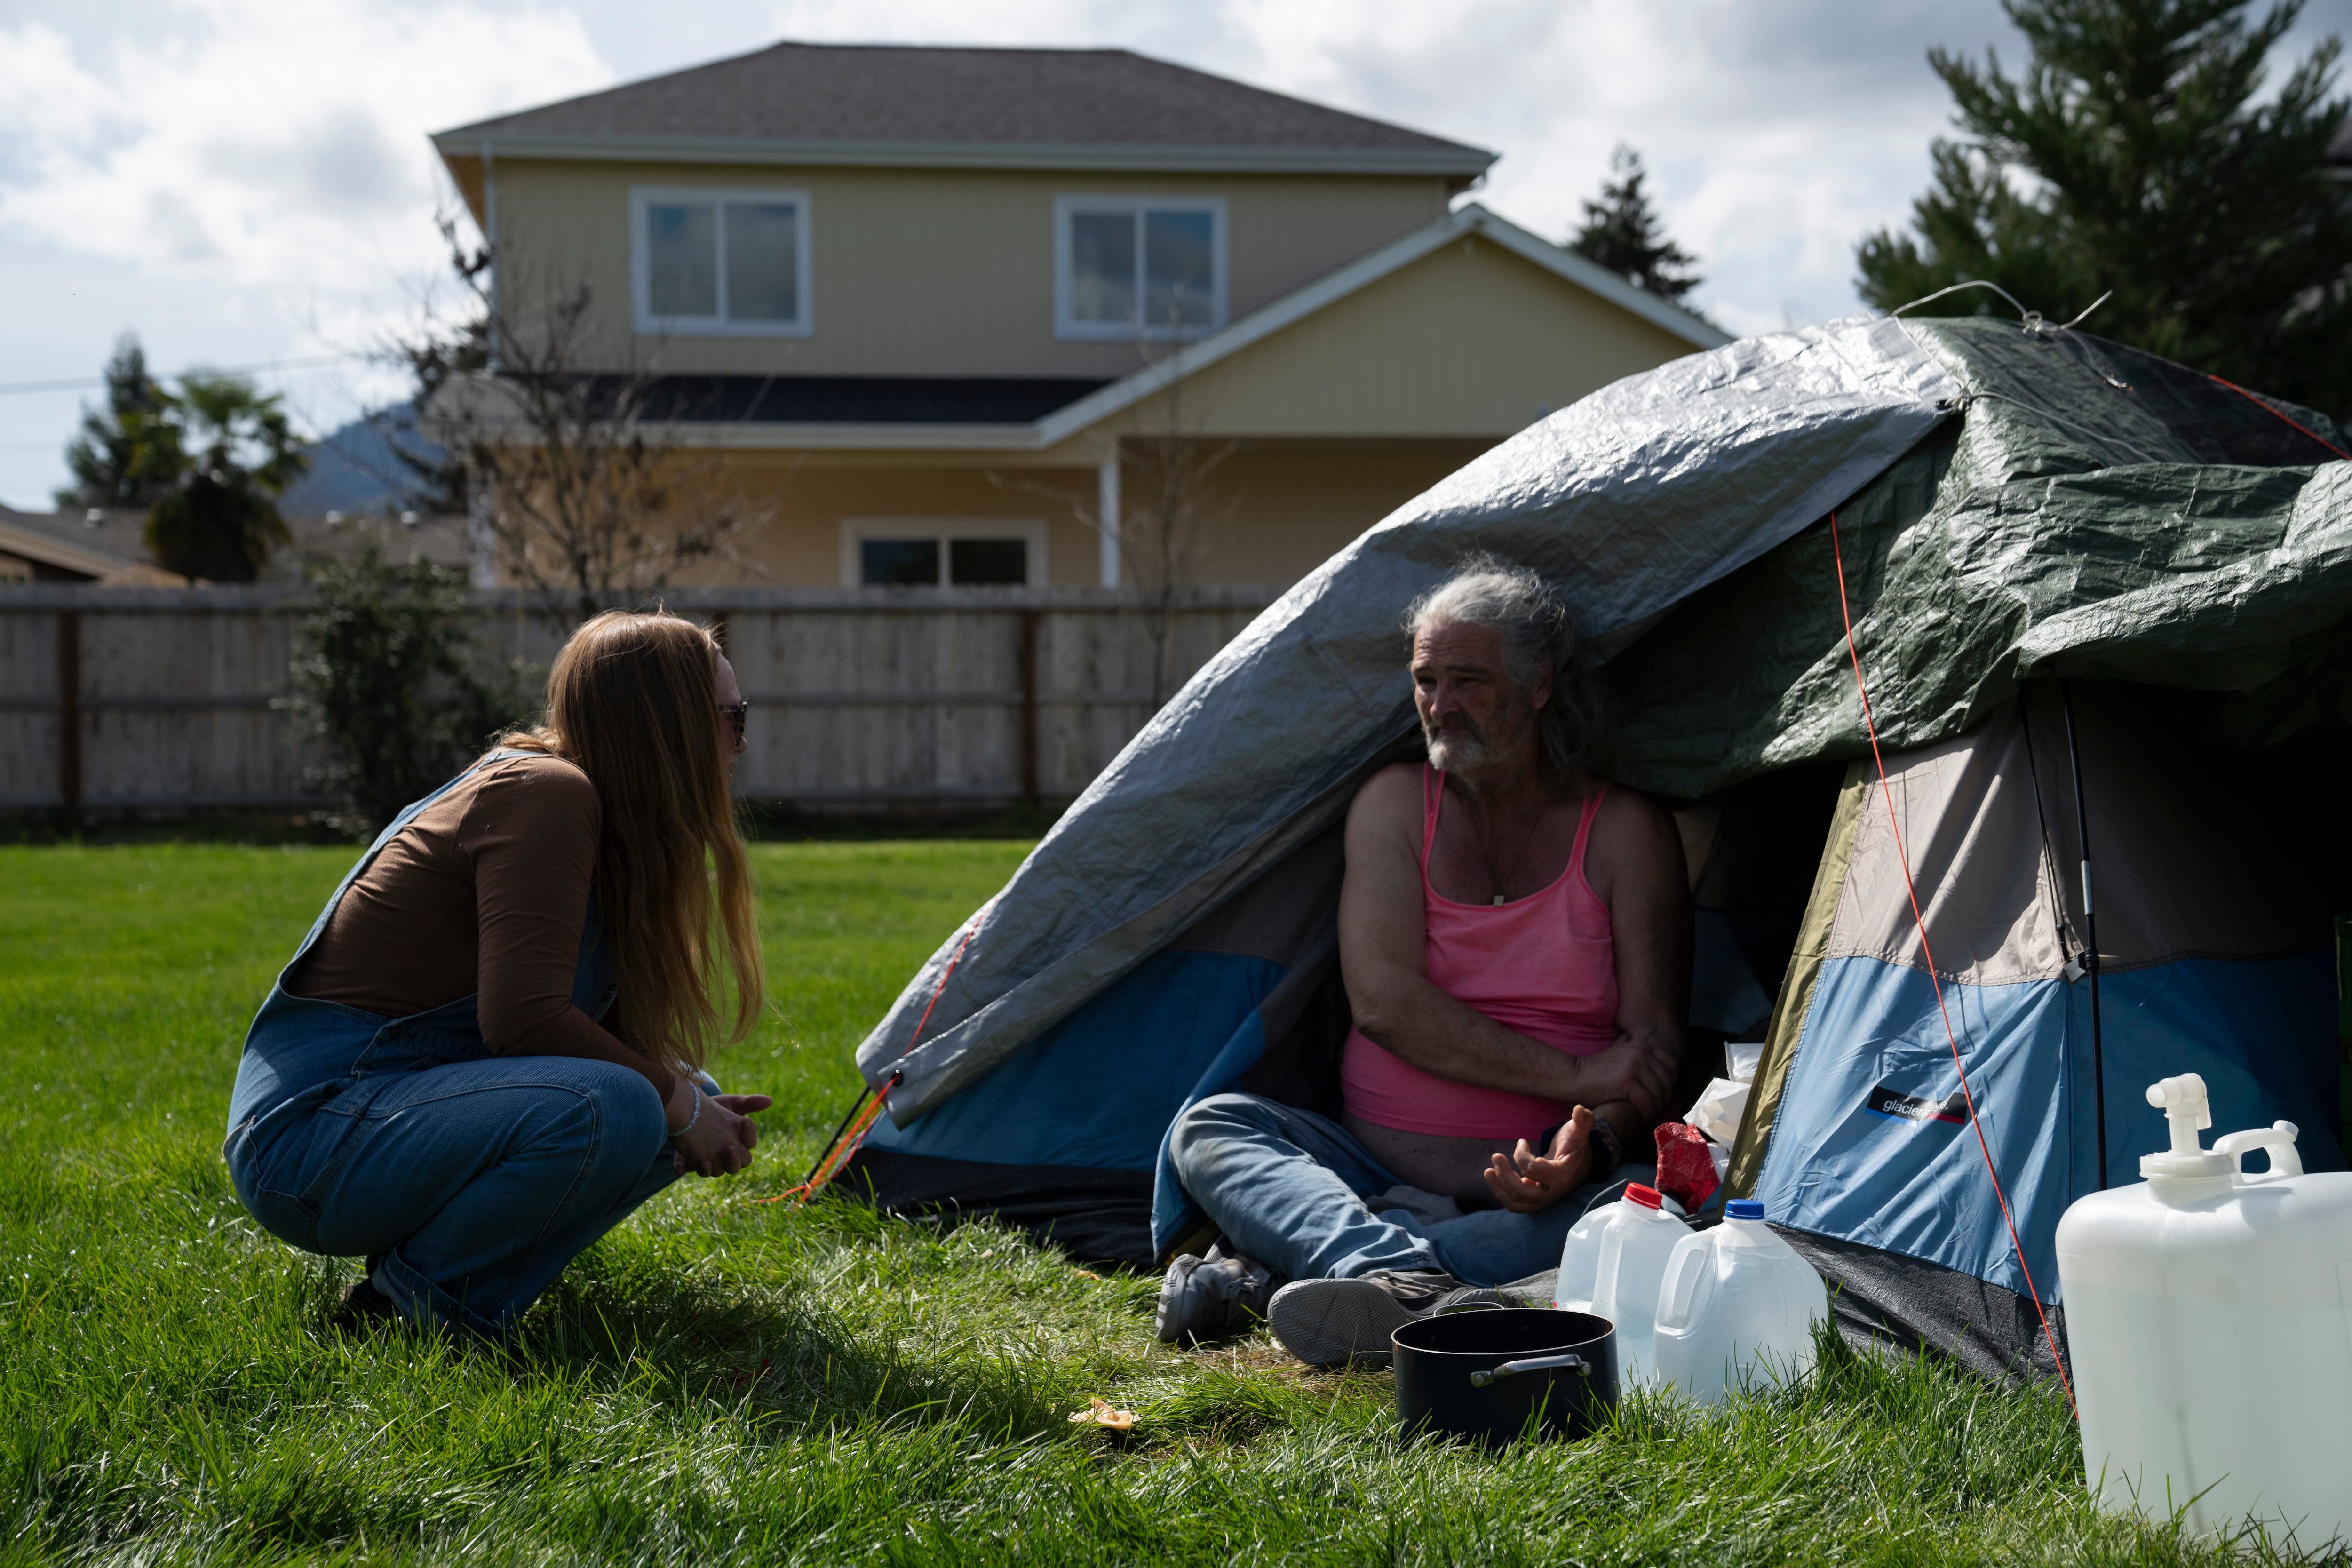 FILE - Cassy Leach, a nurse who leads a group of volunteers who provide food, medical care and other basic goods to the hundreds of homeless people living in parks, talks to Kimberly Marie, who is homeless and camping in Fruitdale Park, on March 21, 2024, in Grants Pass, Ore. On Friday, June 28, the Supreme Court ruled that cities can enforce bans on homeless people sleeping outdoors in areas where shelter space is lacking.